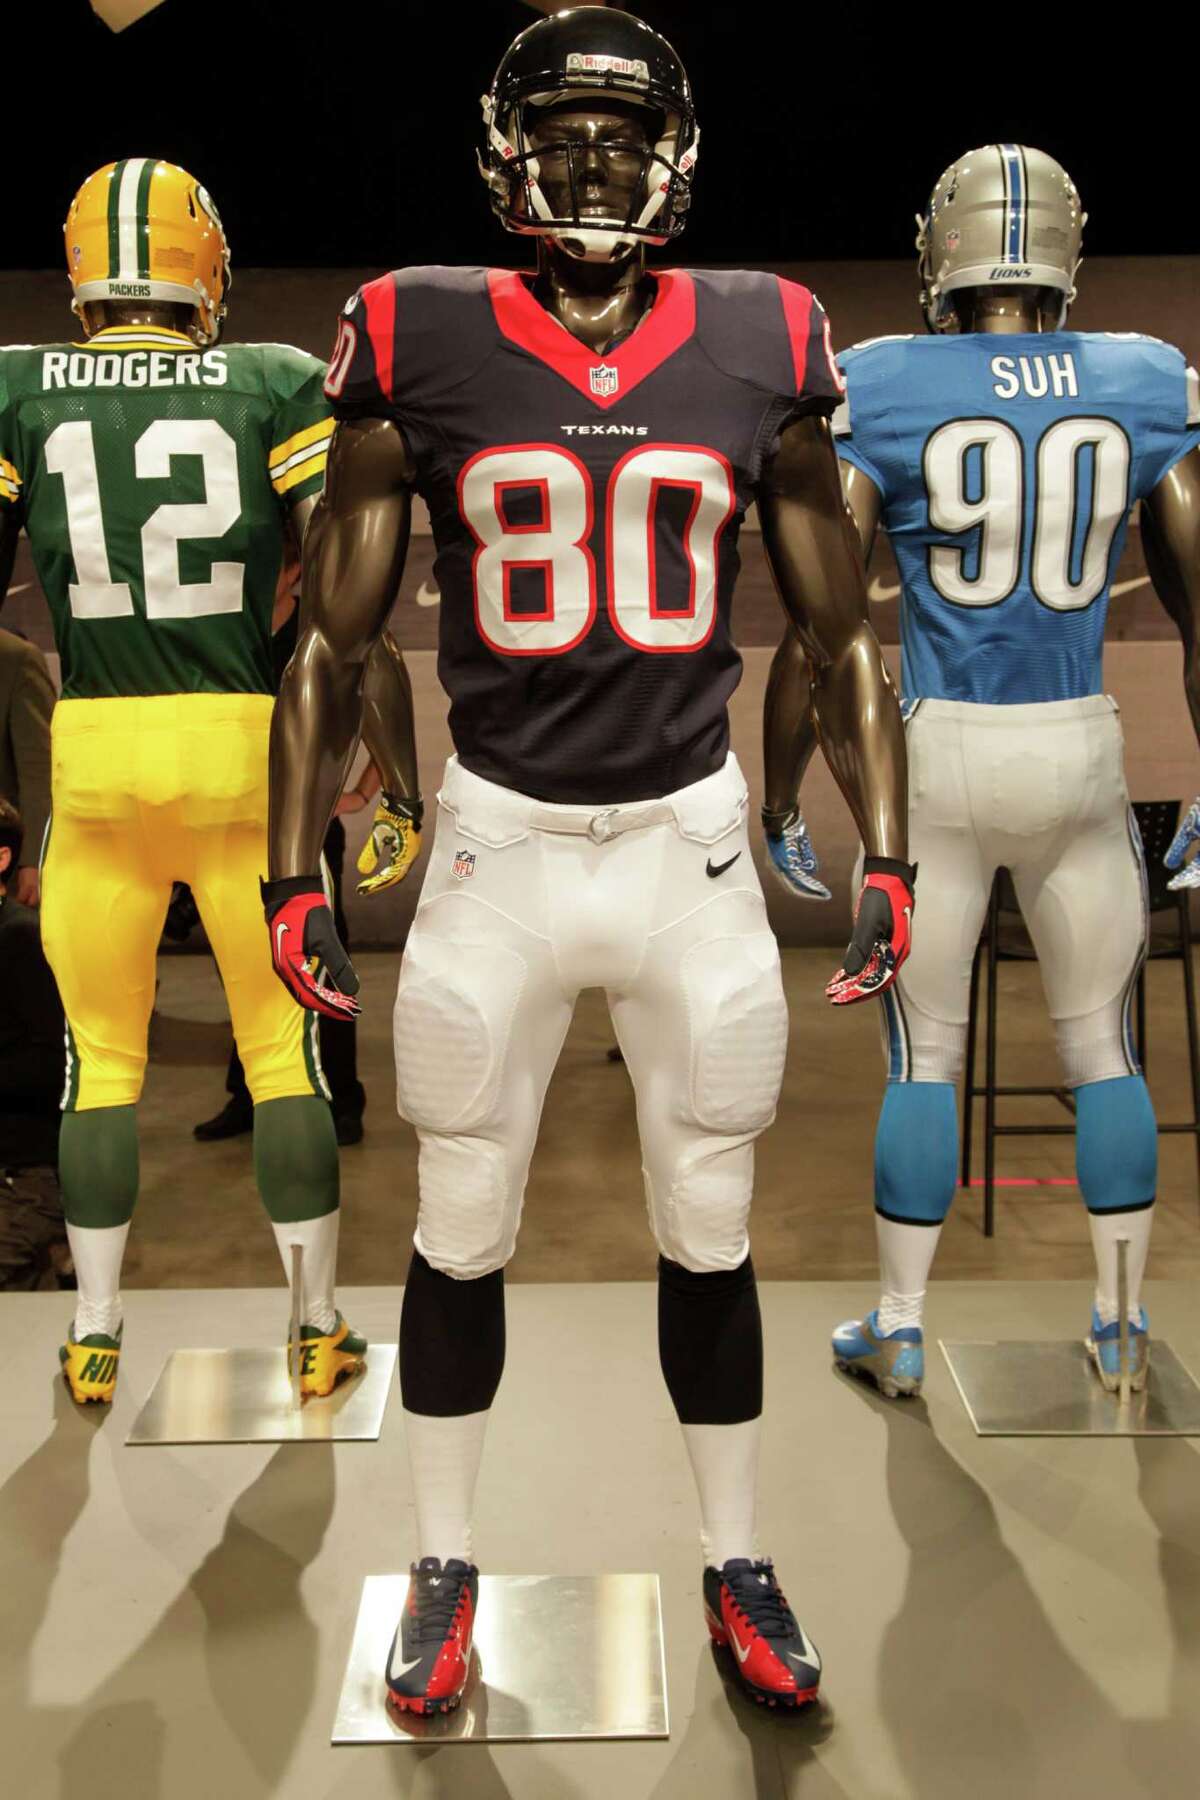 The new Houston Texans uniform is displayed on a mannequin in New York City on April 3. While it is not very different visually, it is made with new technology that makes it lighter, dryer and more comfortable.